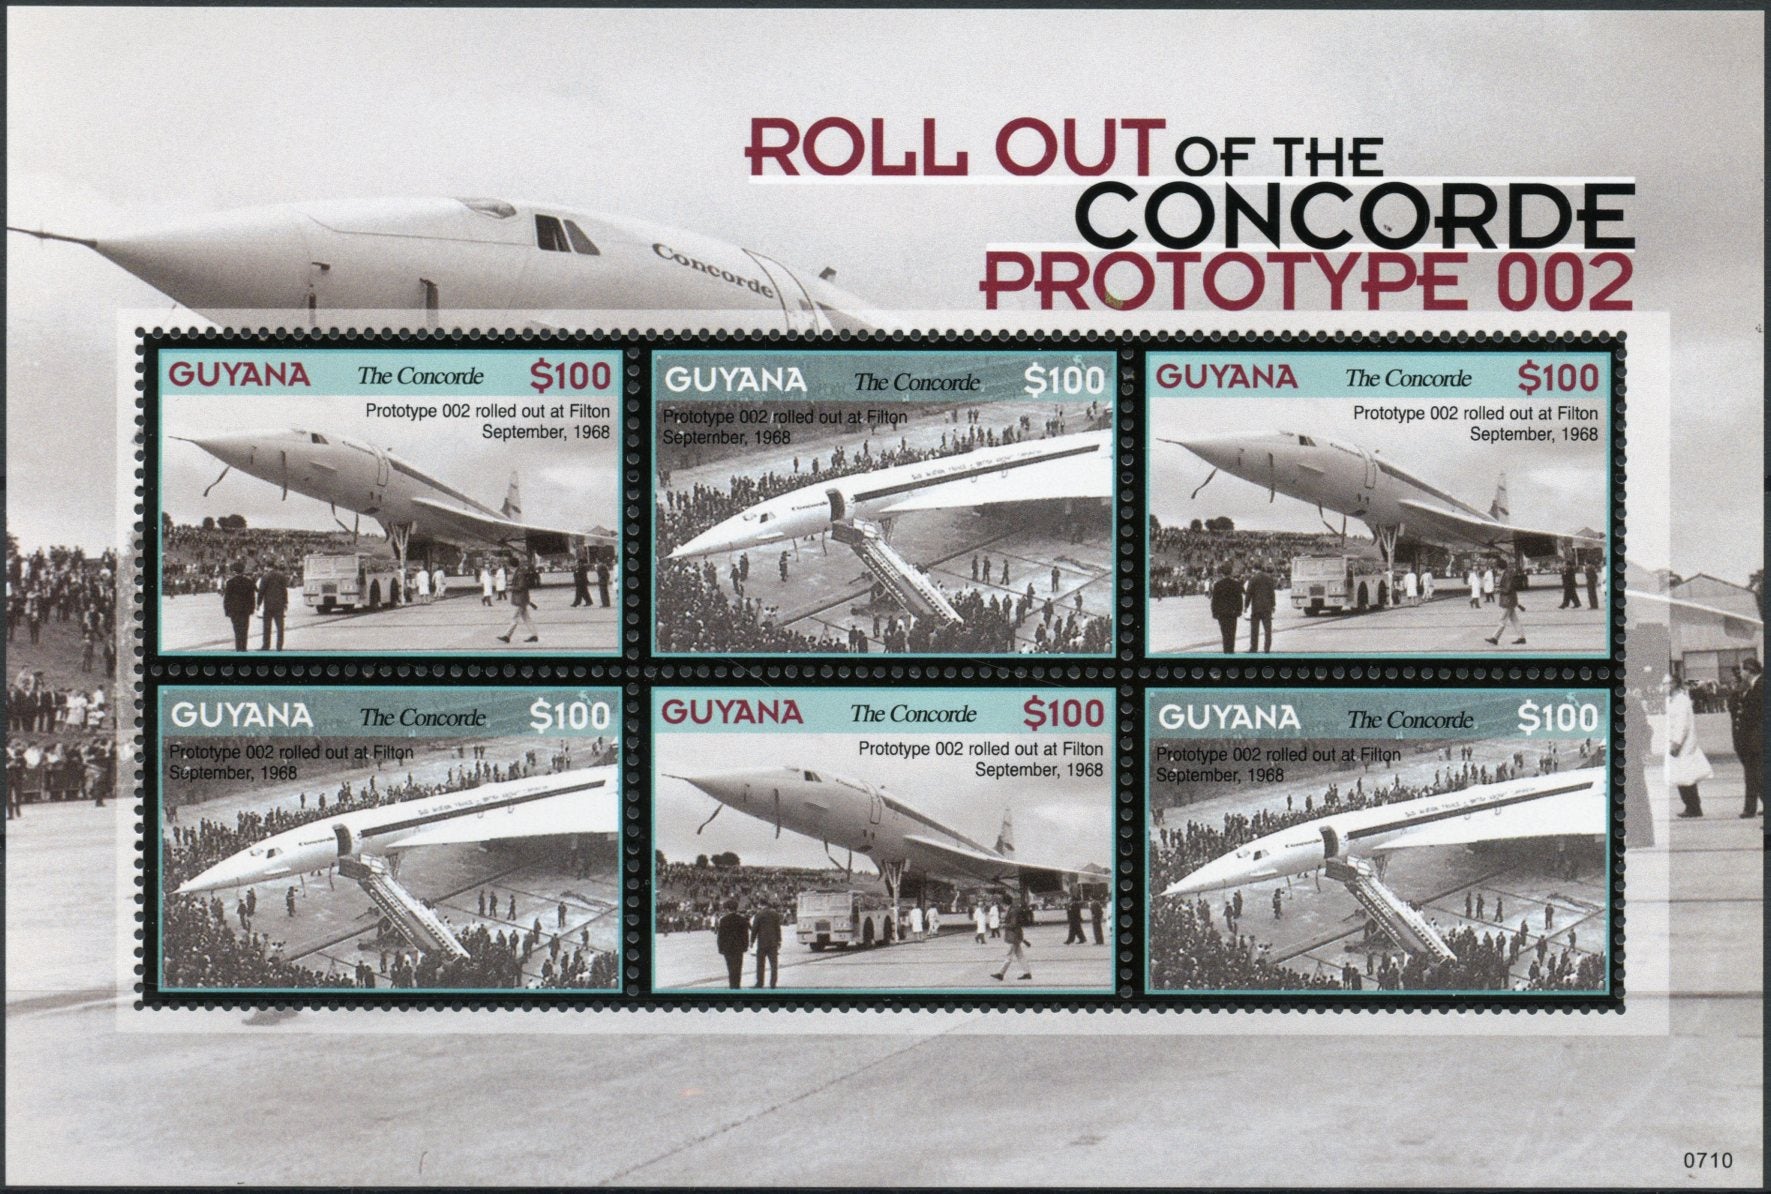 Guyana 2007 MNH Concorde Prototype 002 Roll Out 6v M/S Jet Plane Aviation Stamps